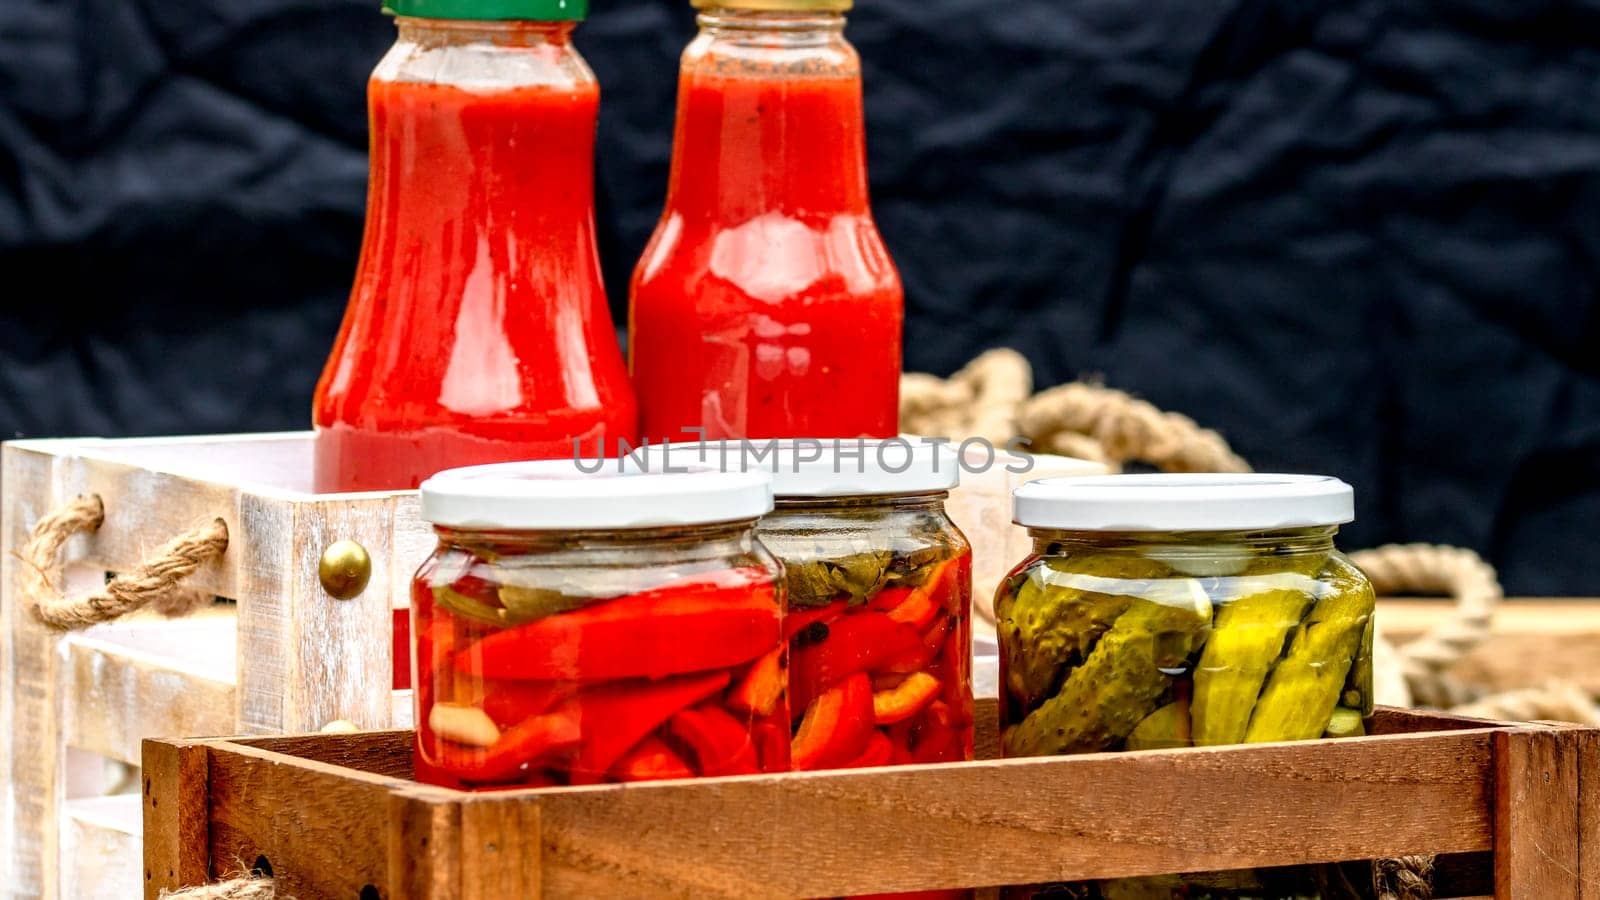 Bottles of tomato sauce, preserved canned pickled food concept isolated in a rustic composition.